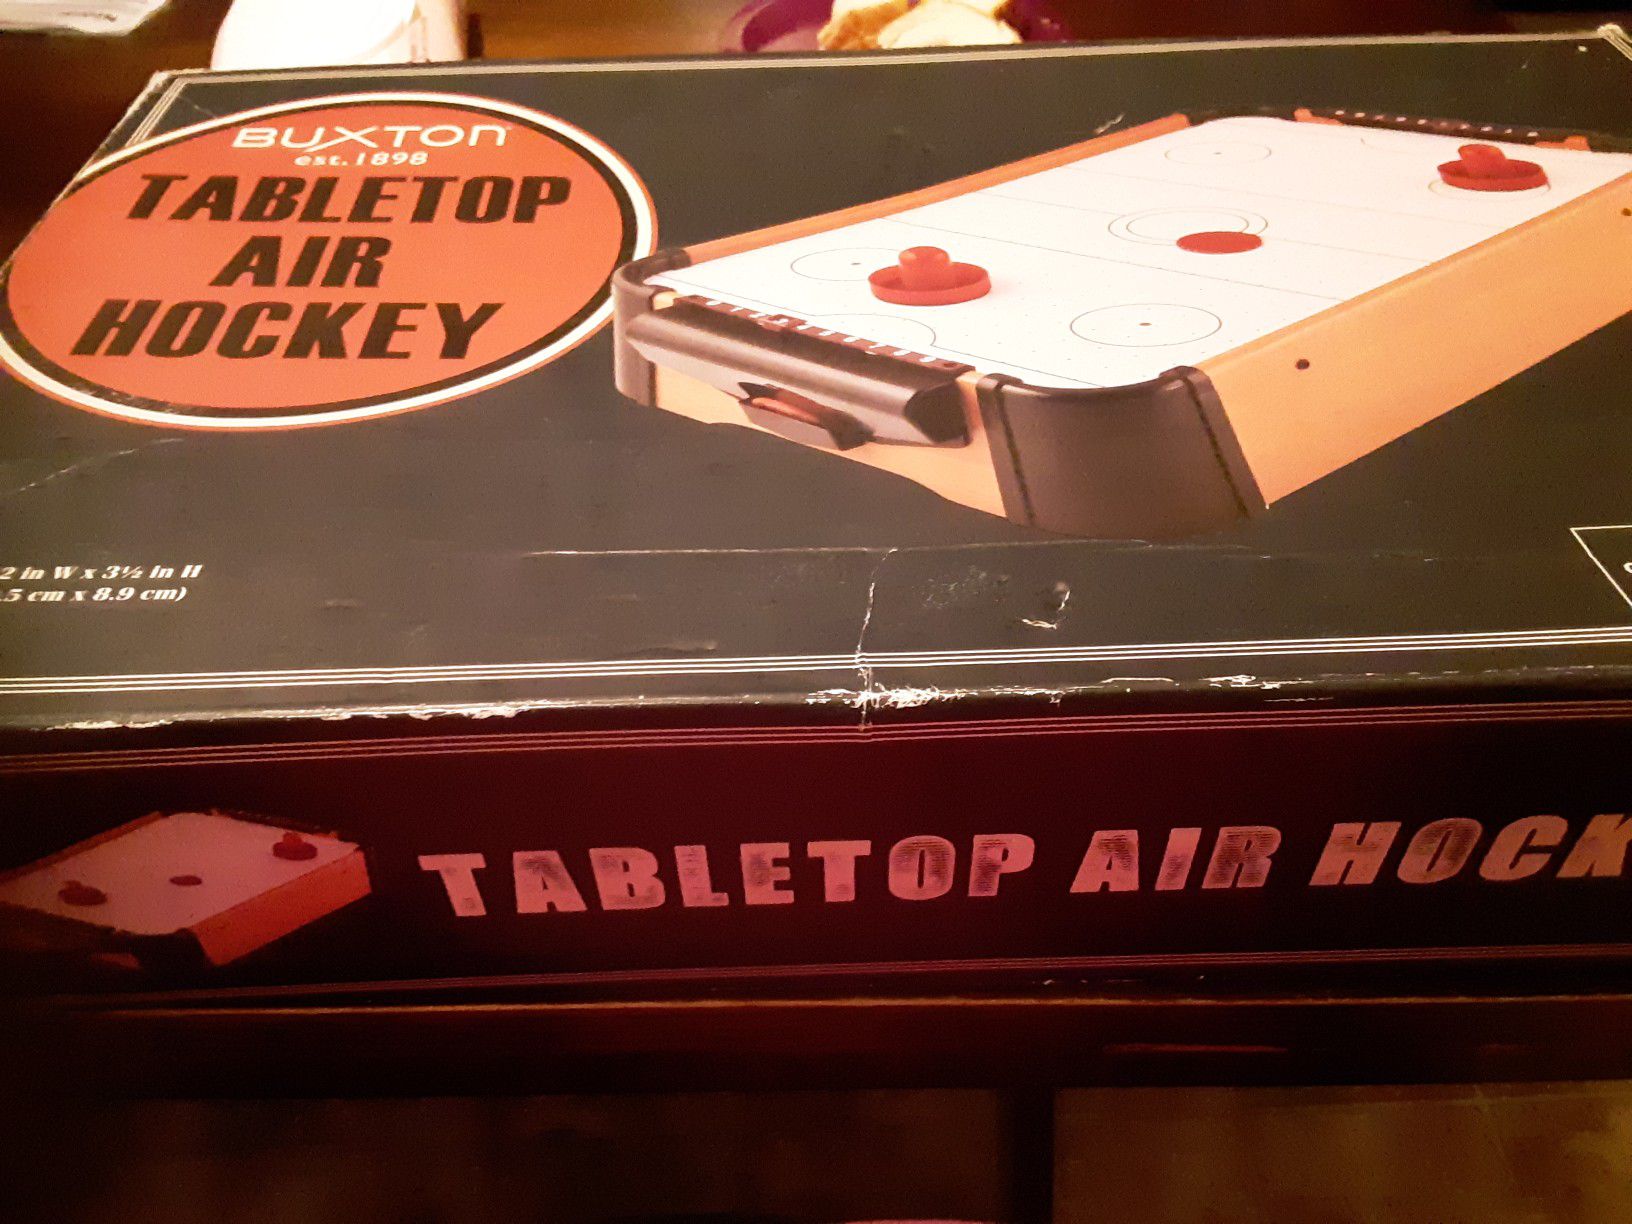 Table Top Air Hockey i well let it go for $5 now..😊